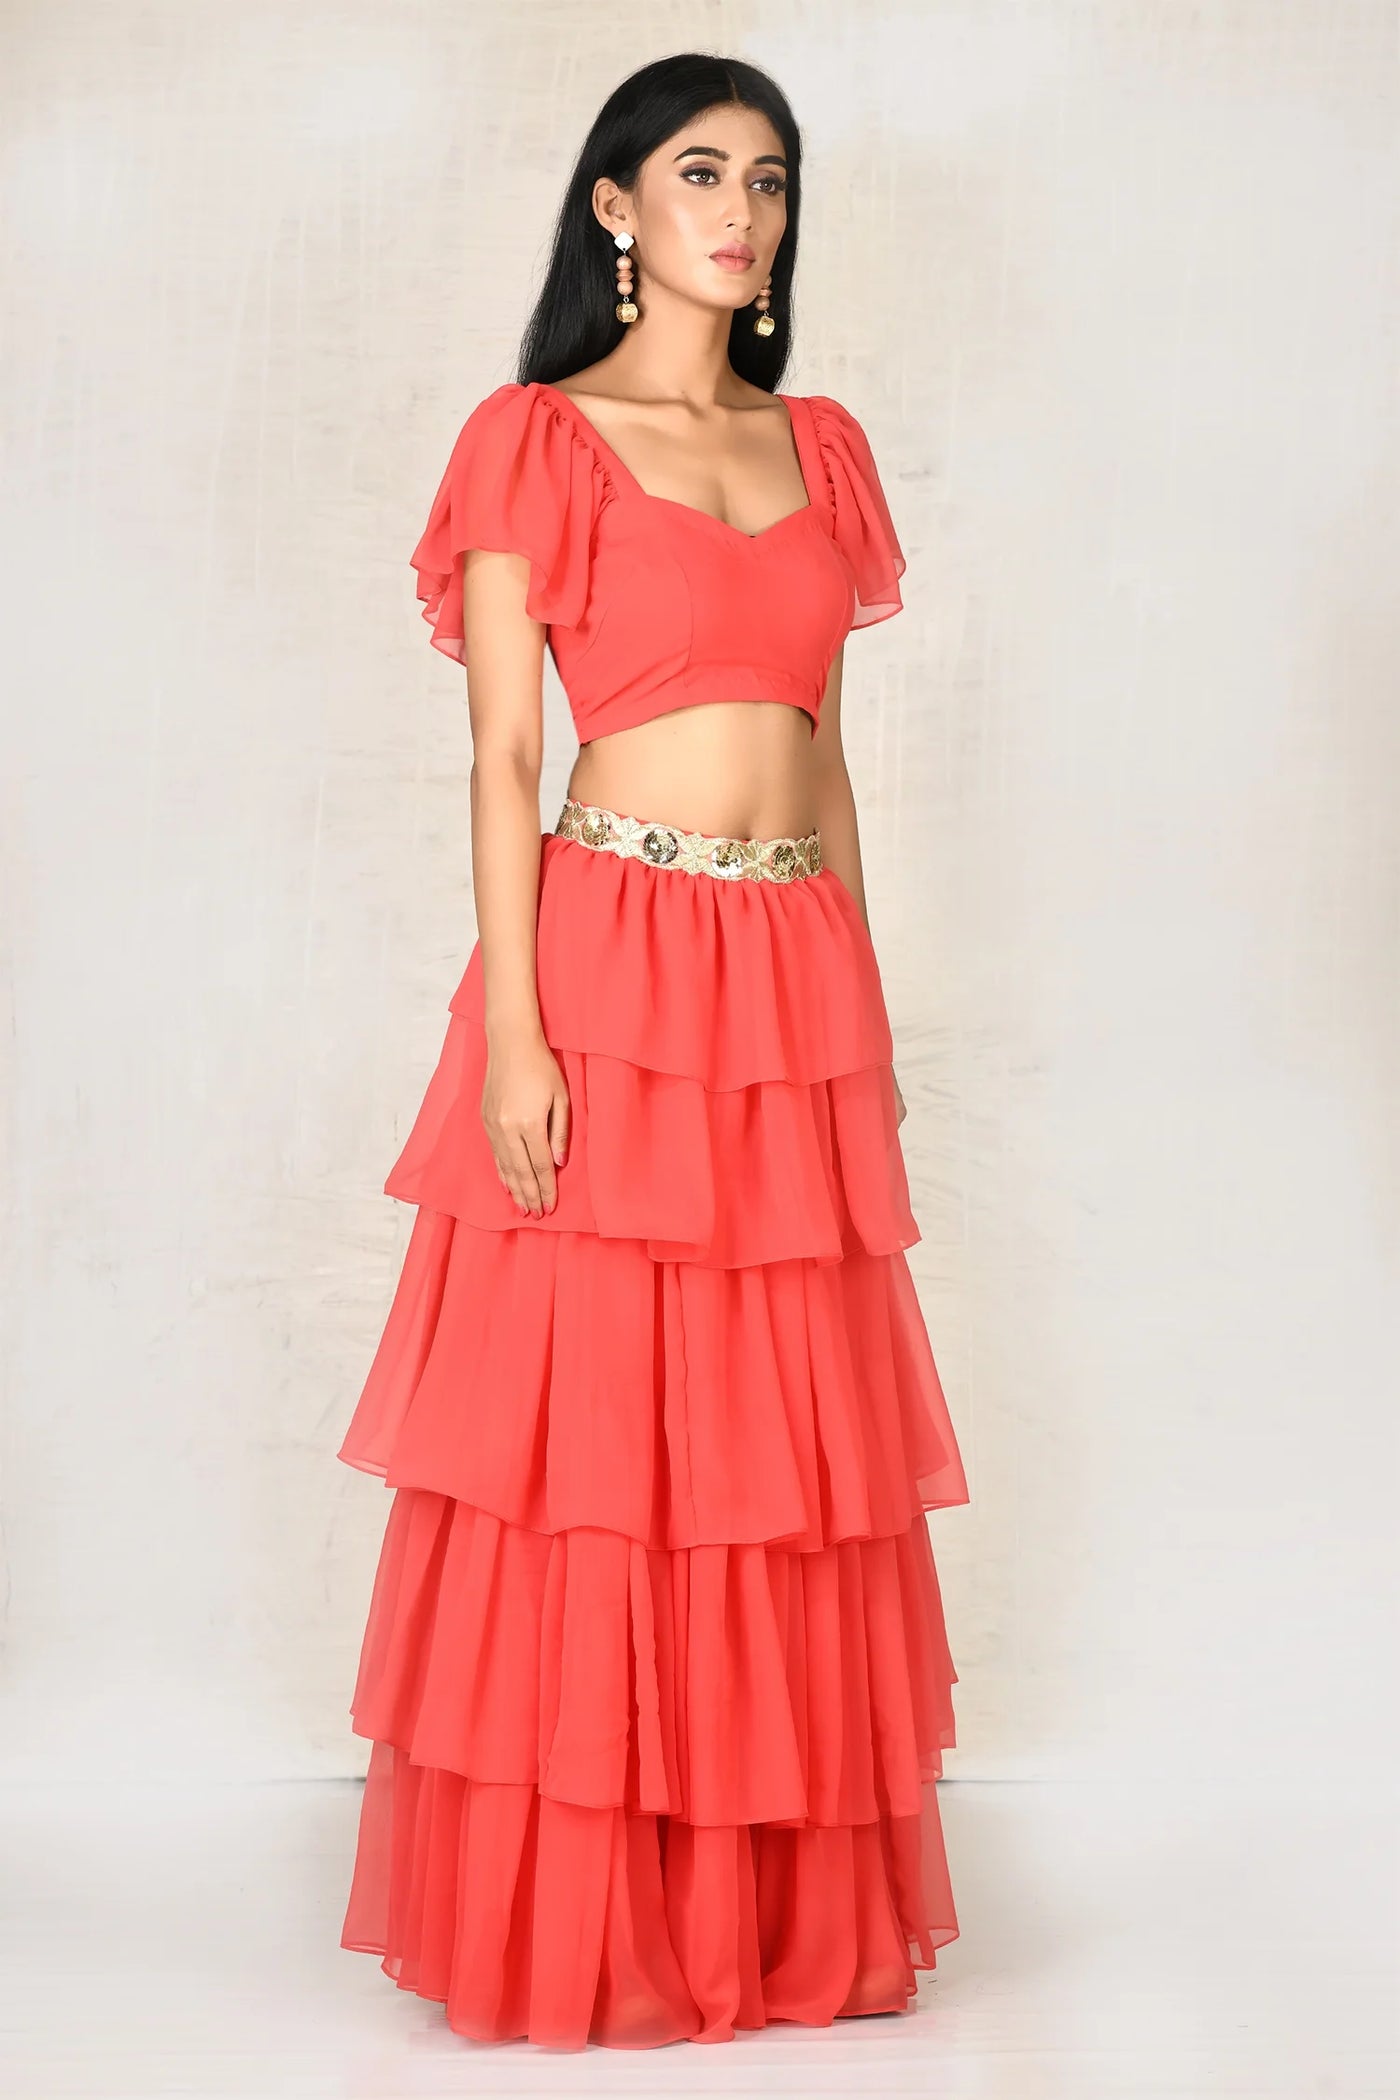 Red Crop Top Skirt Set - Indian Clothing in Denver, CO, Aurora, CO, Boulder, CO, Fort Collins, CO, Colorado Springs, CO, Parker, CO, Highlands Ranch, CO, Cherry Creek, CO, Centennial, CO, and Longmont, CO. Nationwide shipping USA - India Fashion X